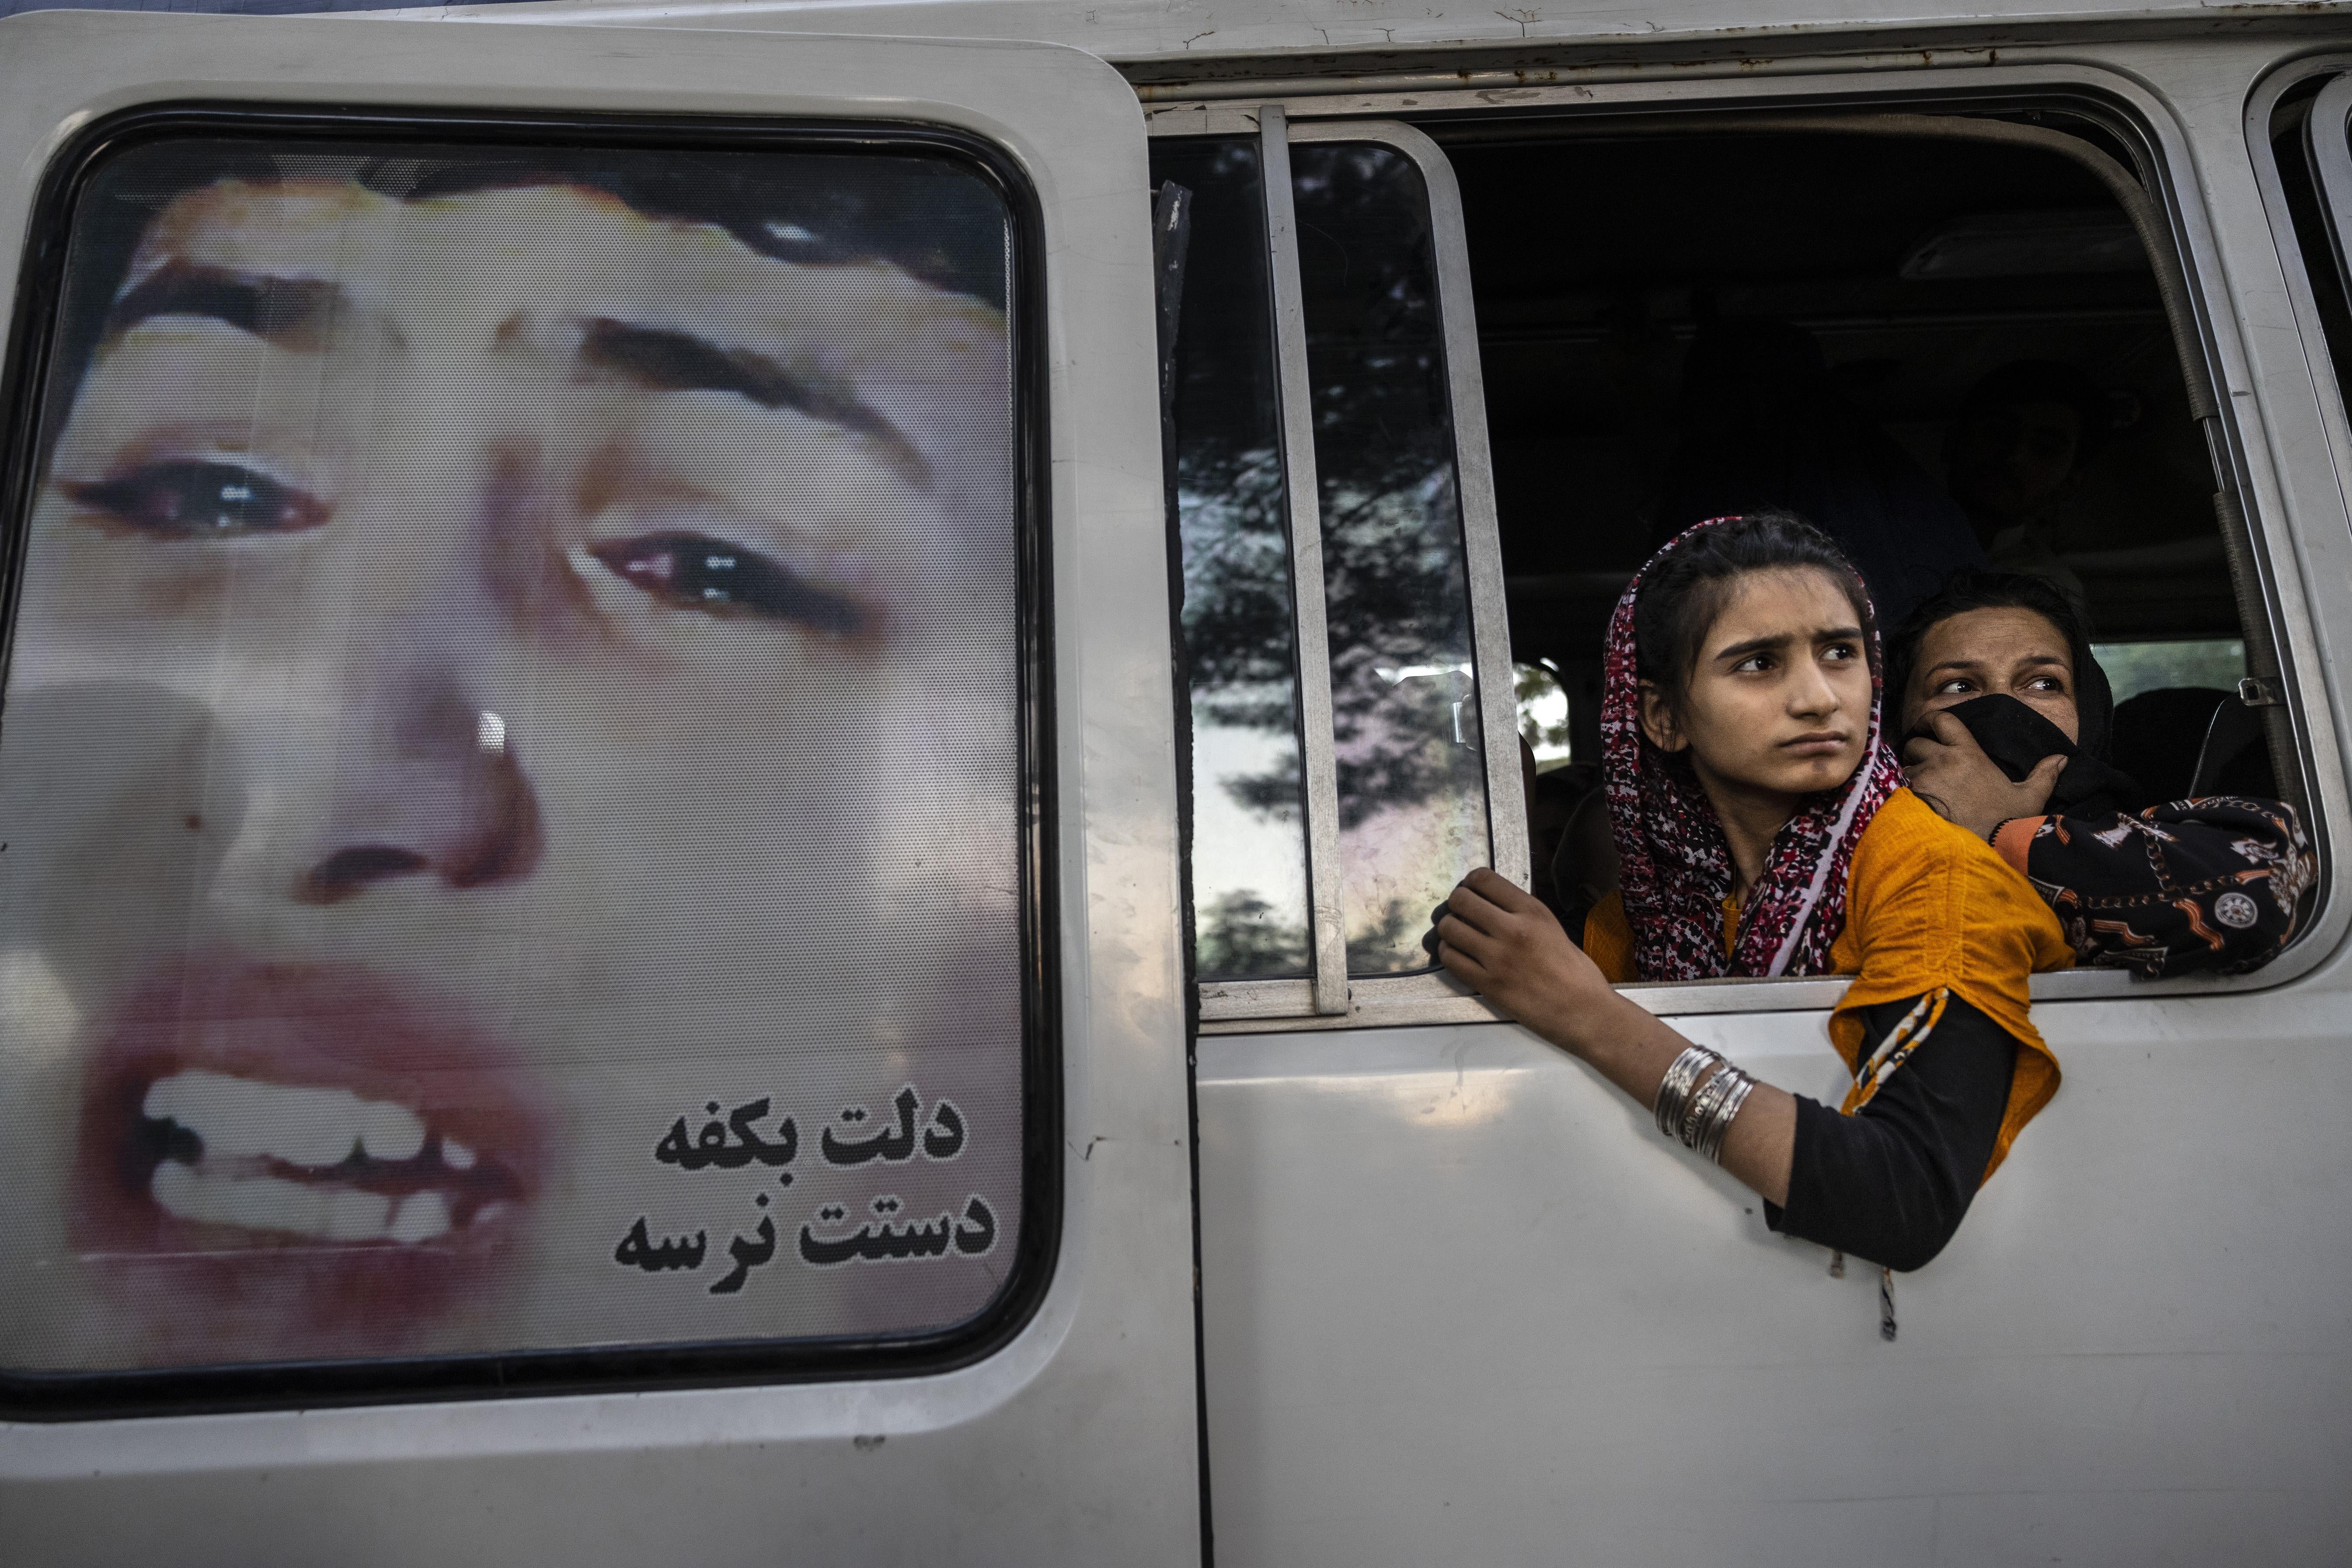 Young Afghan women look out the window of a van. There is an image of a crying woman on one of the van doors.